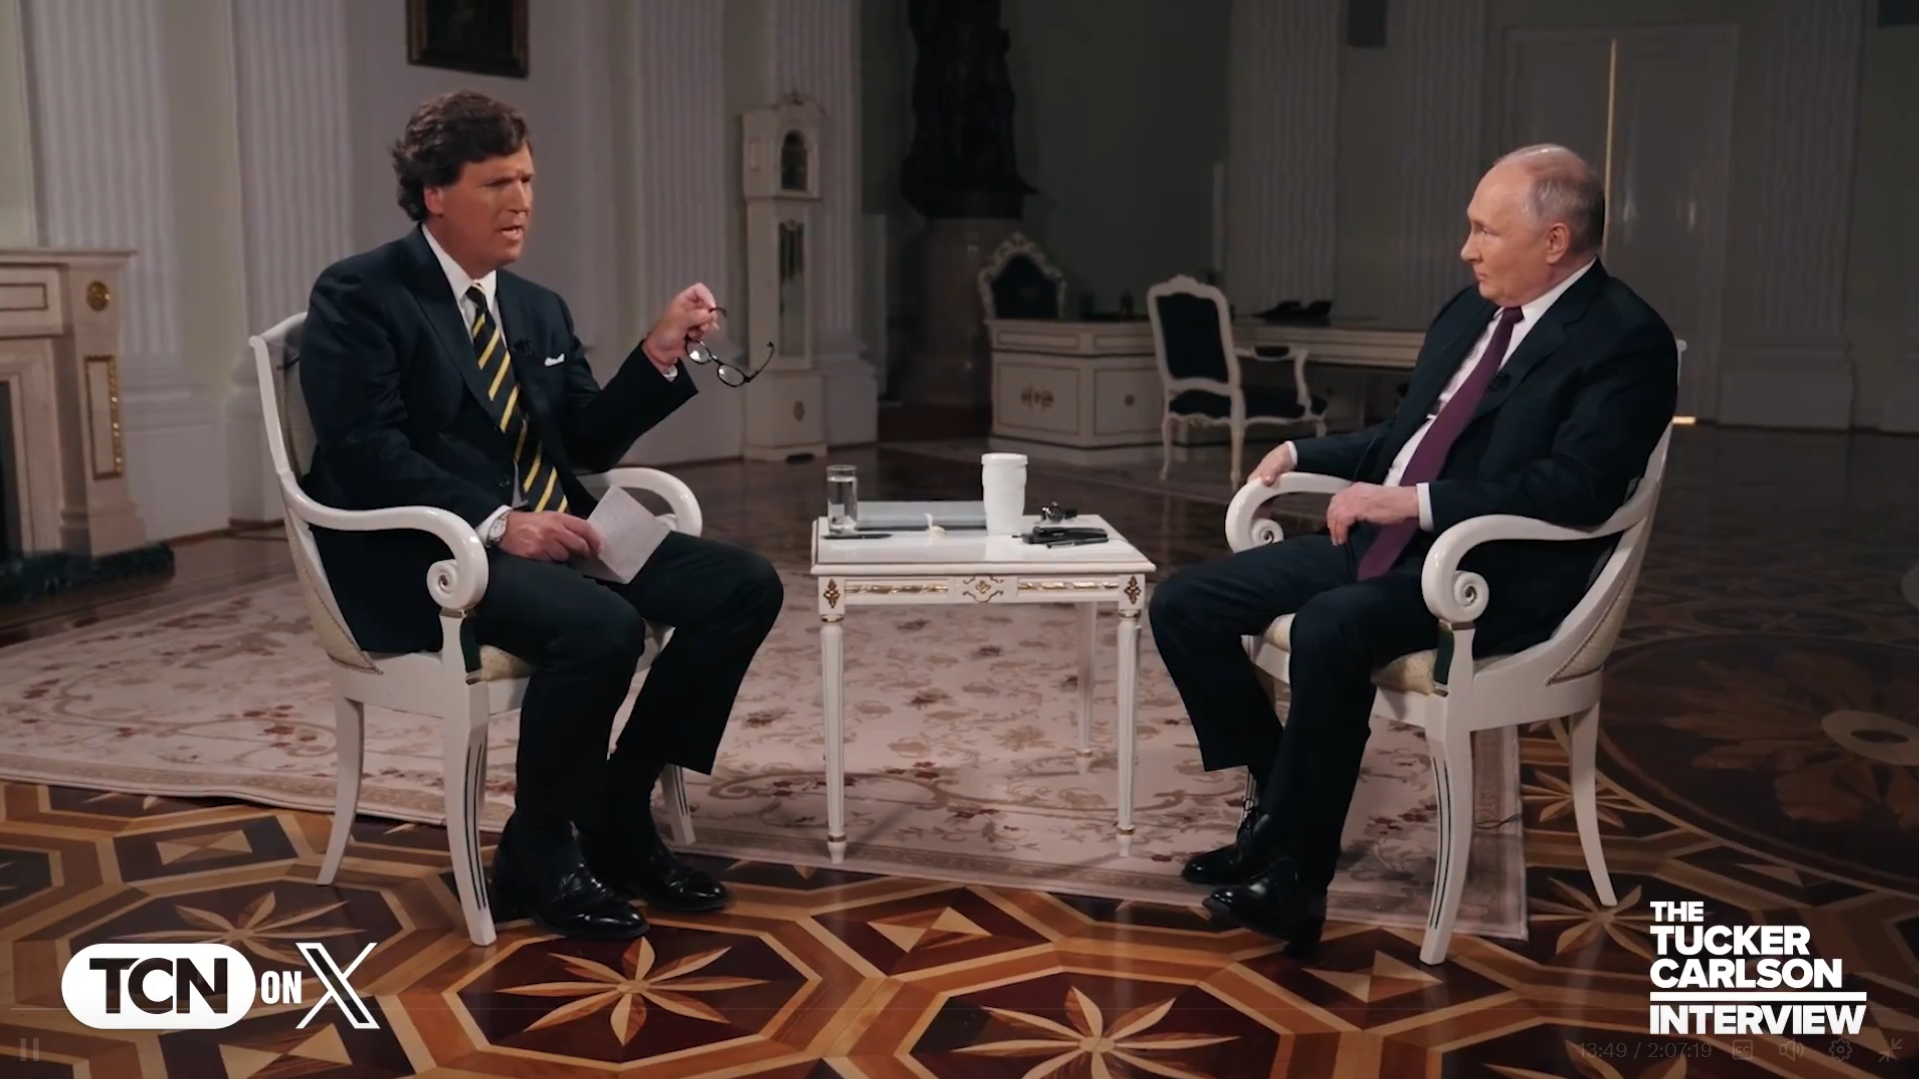 Putin's thought on his interview with Tucker Carlson